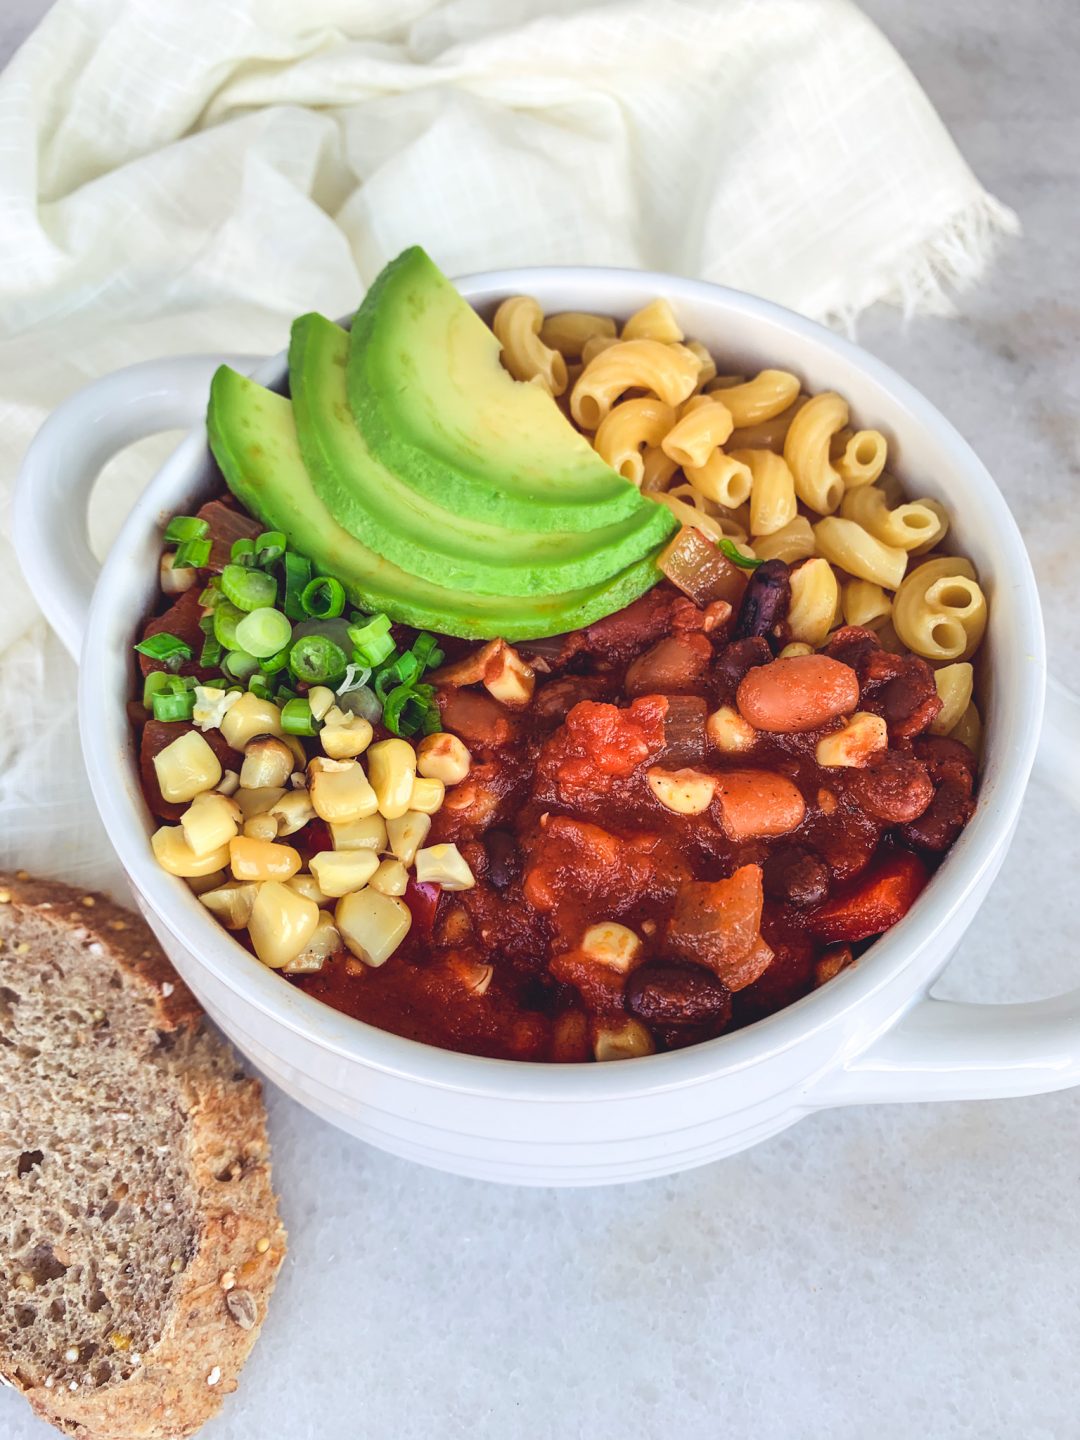 A bowl full of vegan chili made in a slow cooker using three different beans and veggies, and garnished with avocado, scallions, and roasted corn.